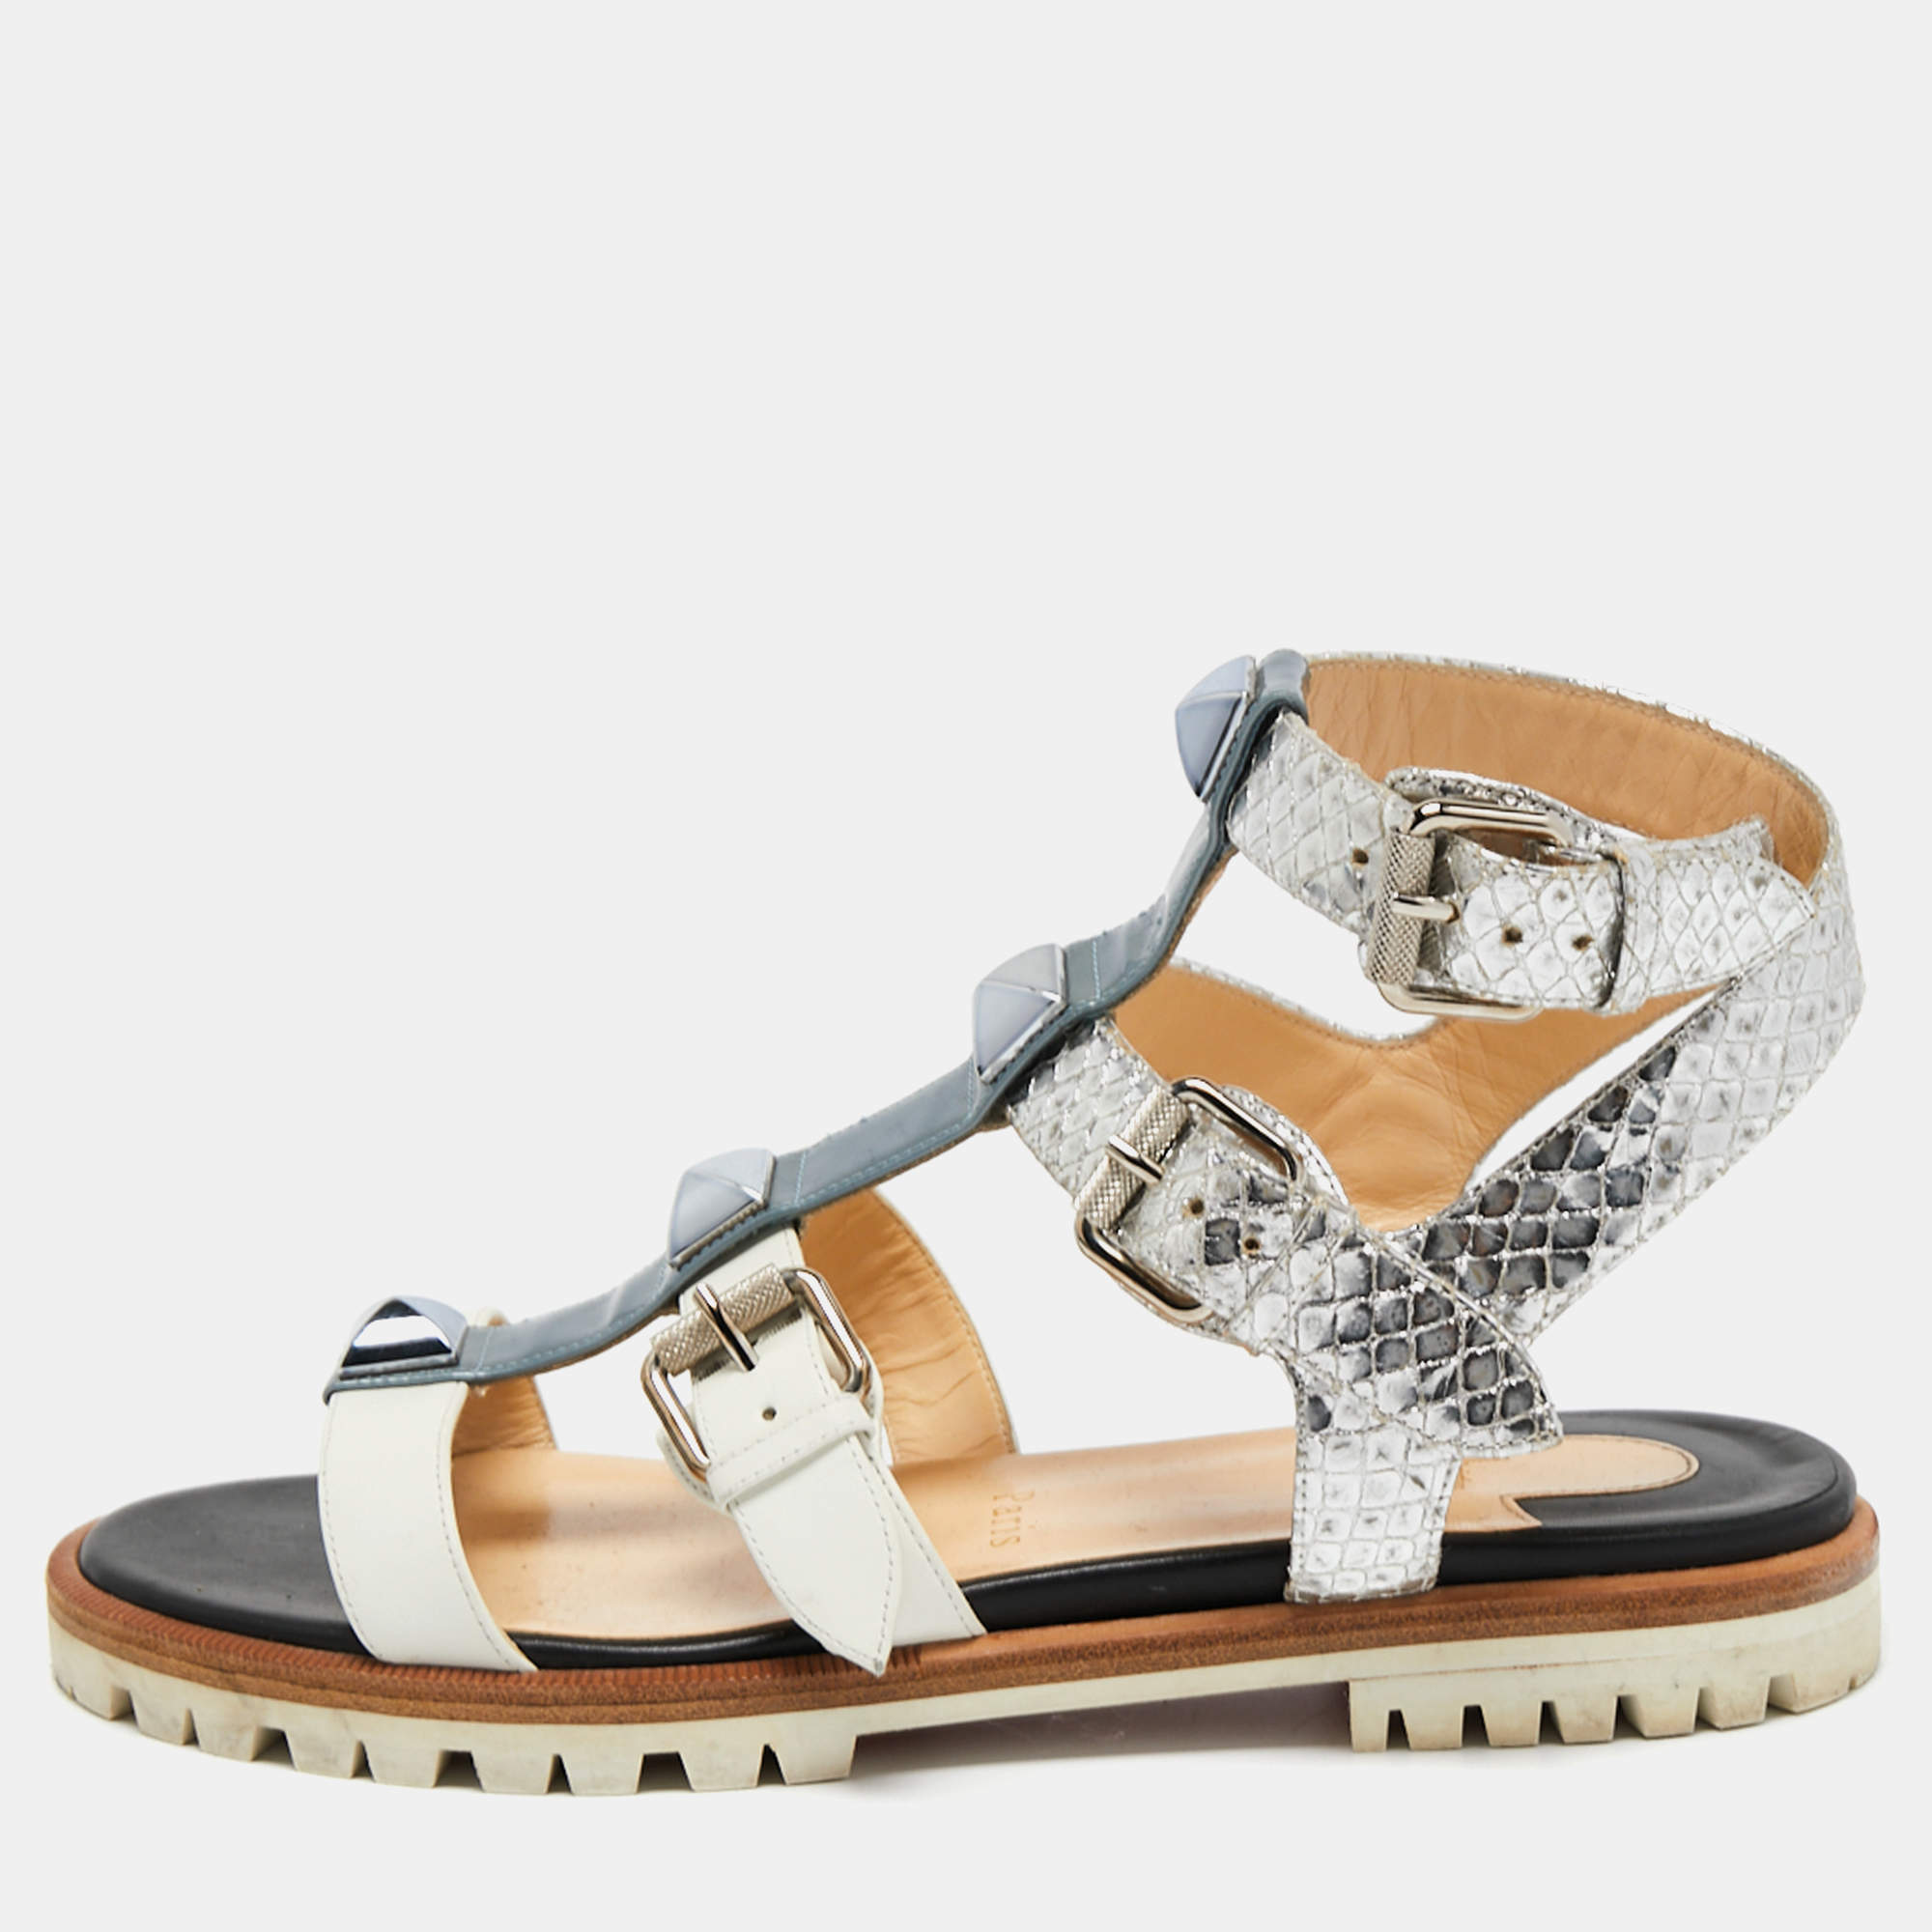 Christian Louboutin Tricolor Leather and Python Embossed Studded Rock N Buckle Flat Sandals Side 36